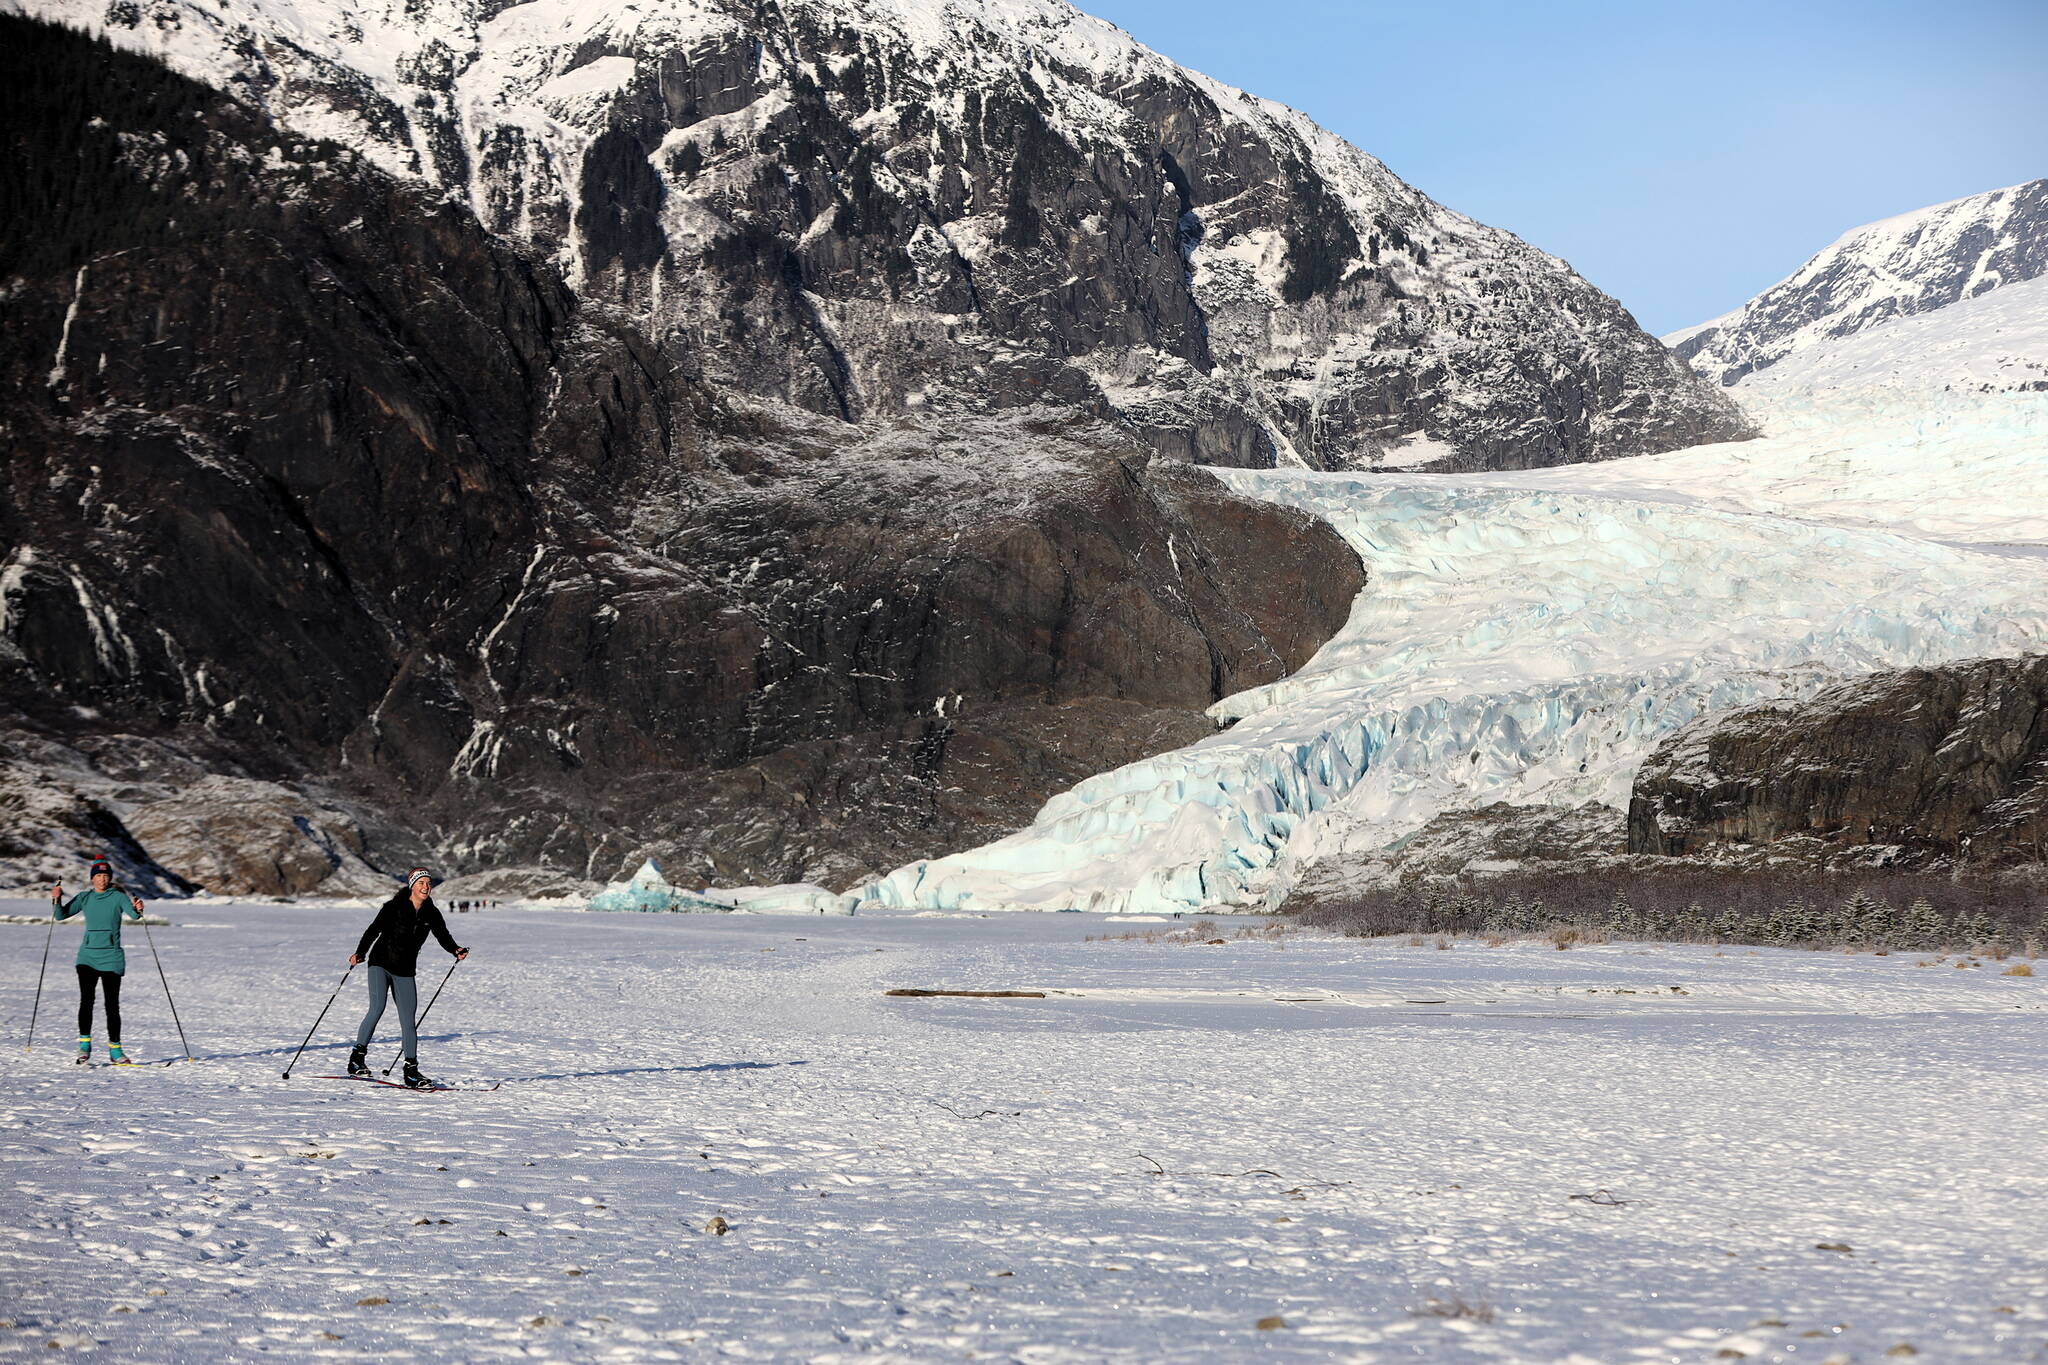 Skiers cross the frozen lake in front of the Mendenhall Glacier in December. A proposed expansion of the Mendenhall Glacier Recreational Area by the U.S. Forest Service envisions motorized tour boat access in most alternatives, but the three newest ones based on previous public feedback limit vessels to low-impact electronic access or none. (Clarise Larson / Juneau Empire)